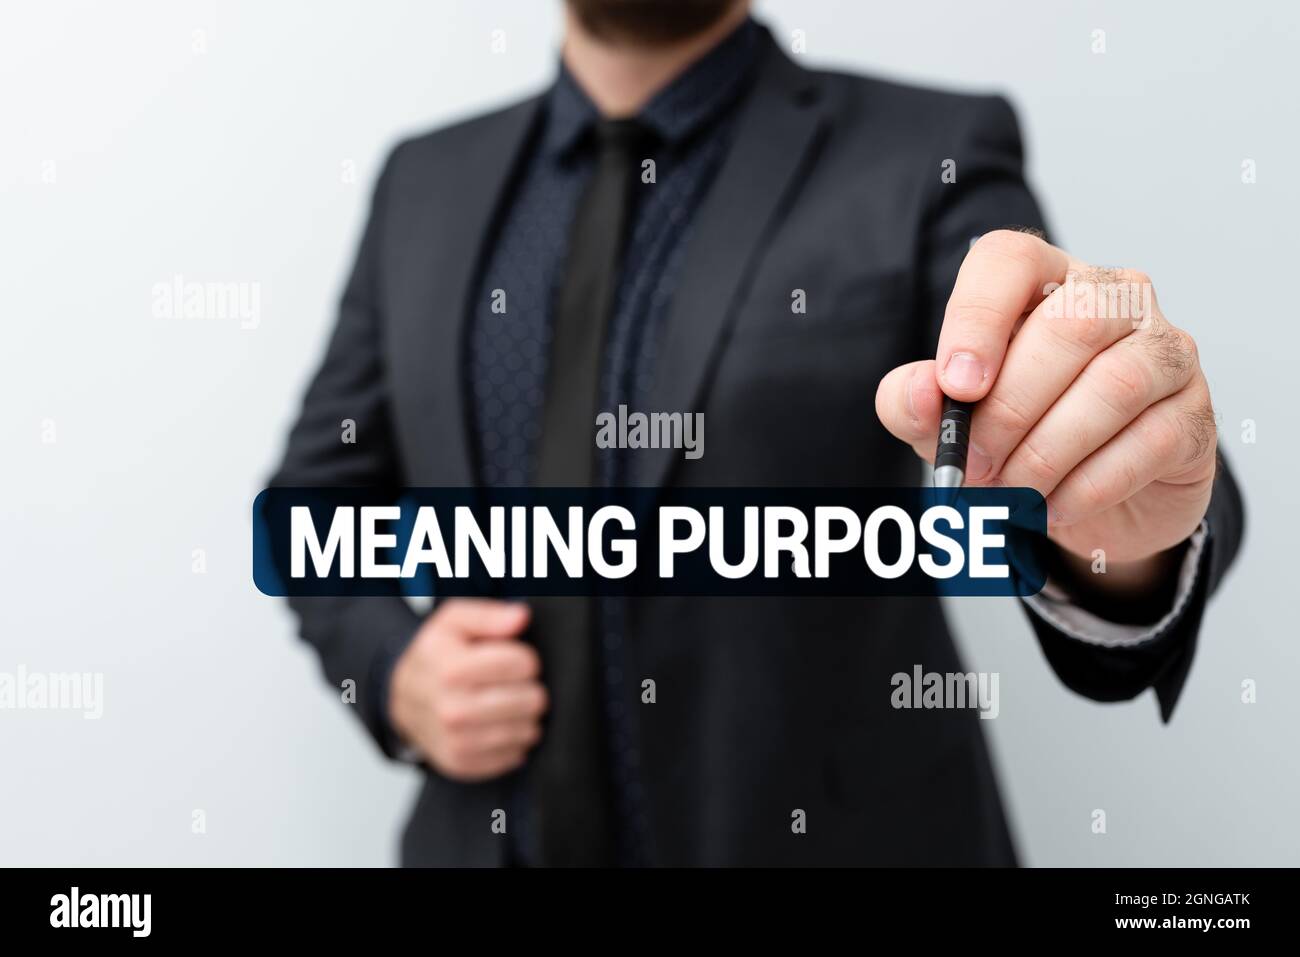 Text caption presenting Meaning Purpose. Business idea The reason for which something is done or created and exists Presenting New Plans And Ideas Stock Photo